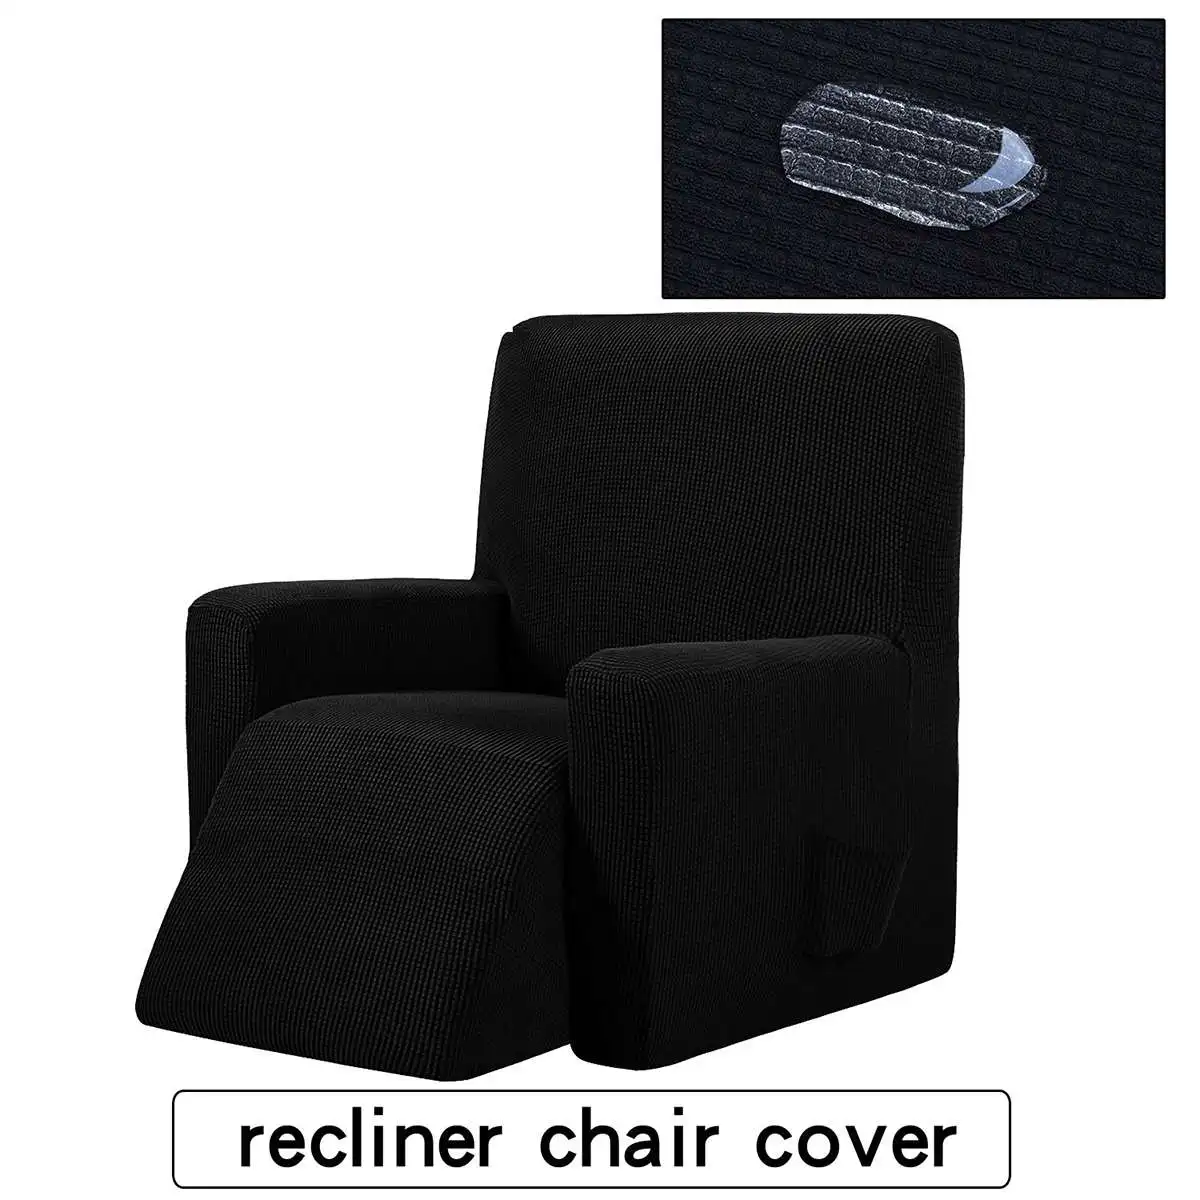 Recliner Couch Cover All-inclusive Sofa Cover Elasticity Stretch Anti-slip Furniture Slipcovers Chair Protector Single Seat Sofa - Цвет: Черный